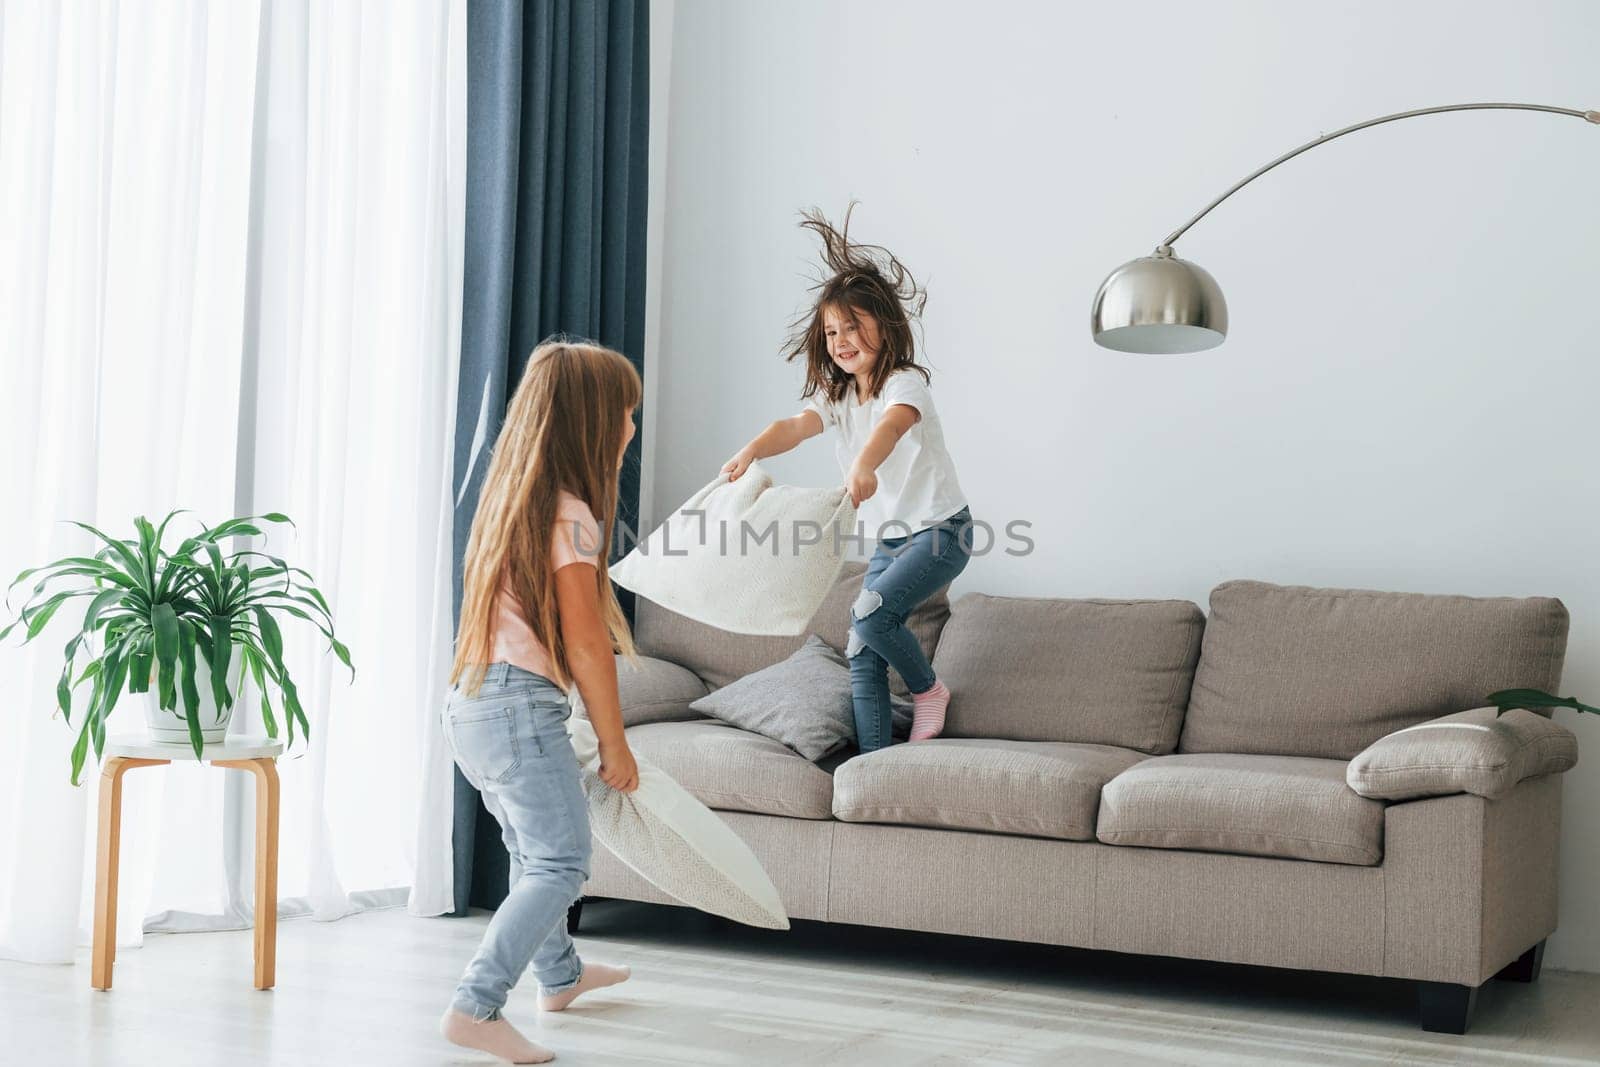 Running with pillows. Kids having fun in the domestic room at daytime together.